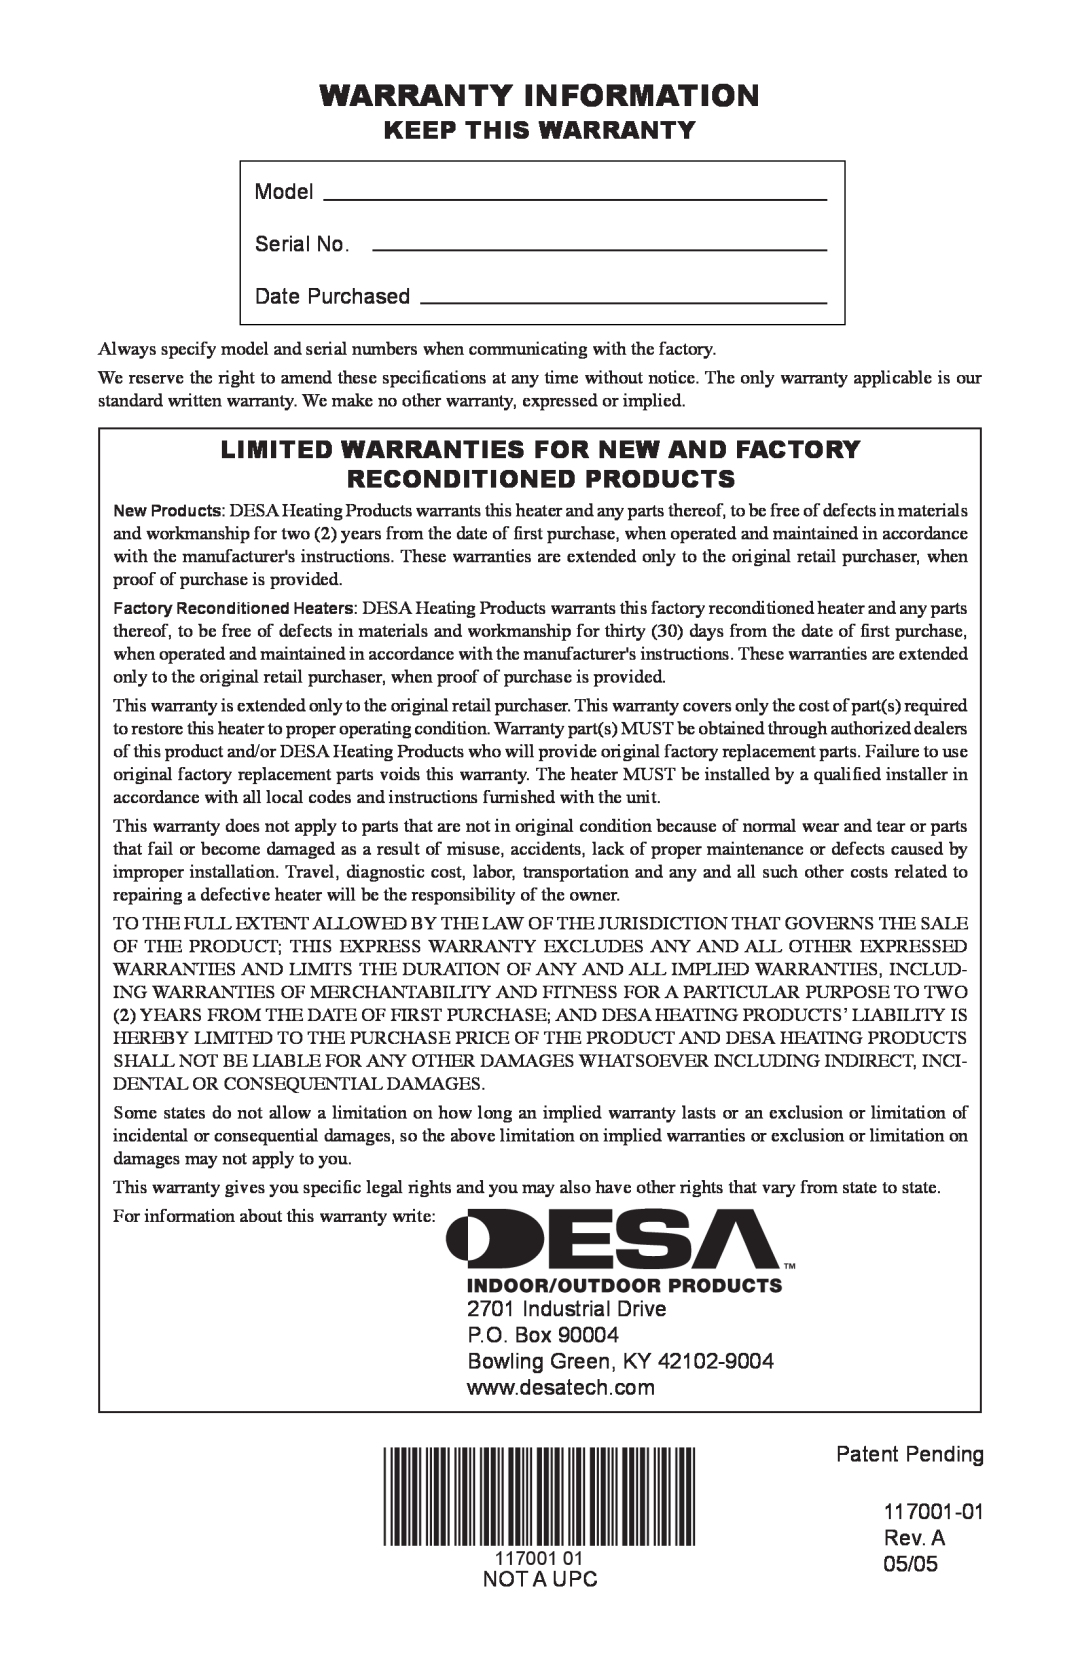 Desa GWP10 GWN10T Warranty Information, Keep This Warranty, Limited Warranties For New And Factory Reconditioned Products 